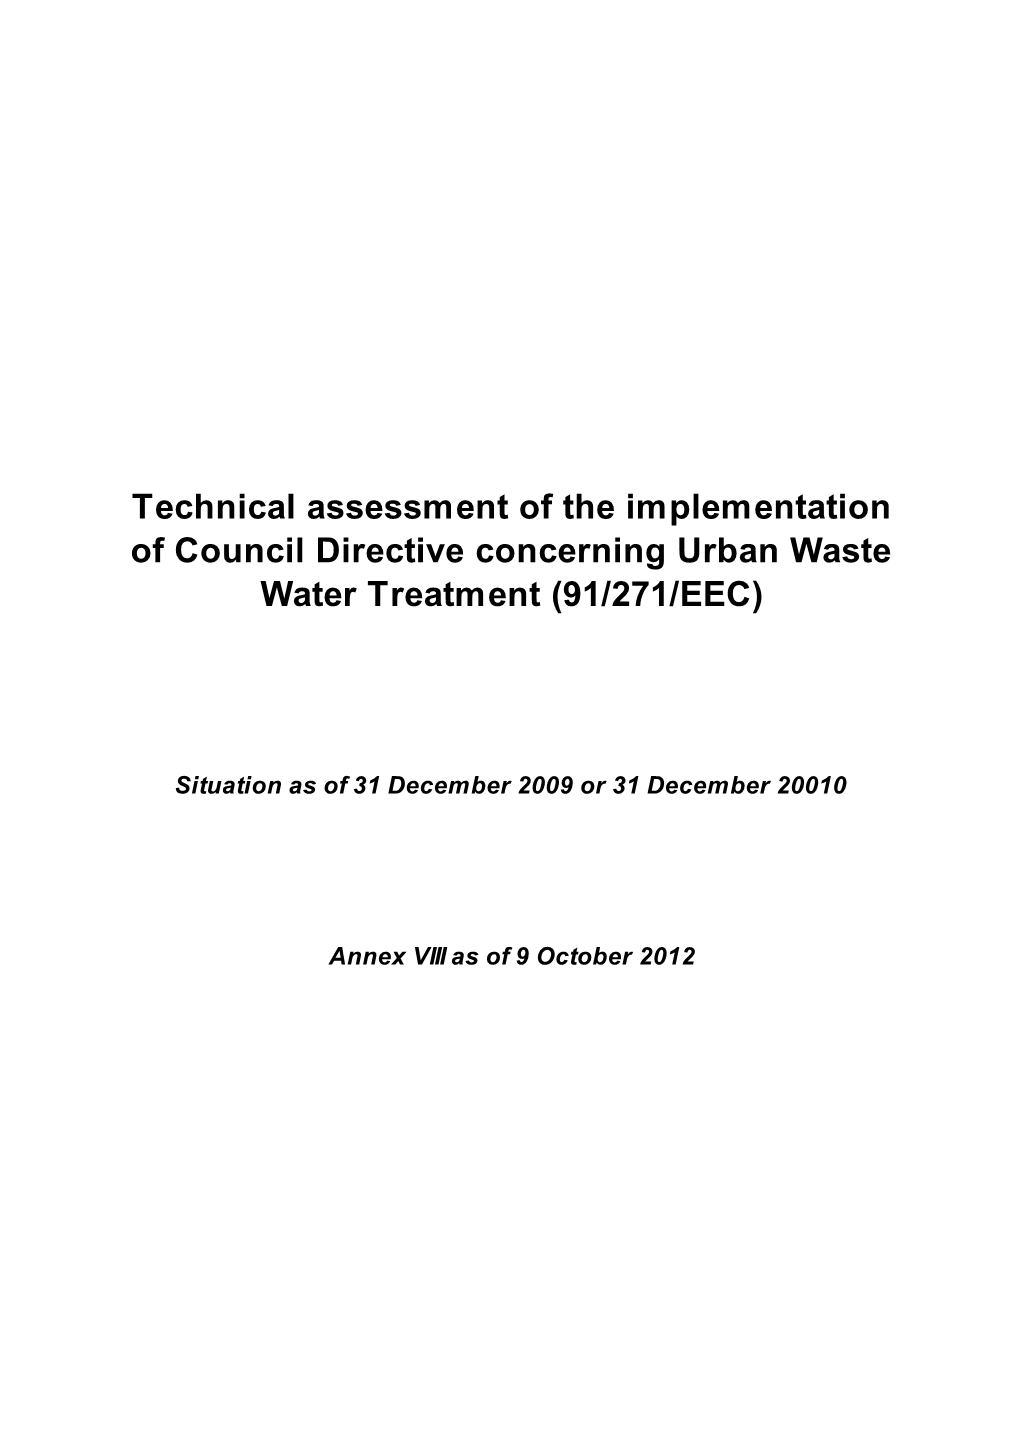 Technical Assessment of the Implementation of Council Directive Concerning Urban Waste Water Treatment (91/271/EEC)